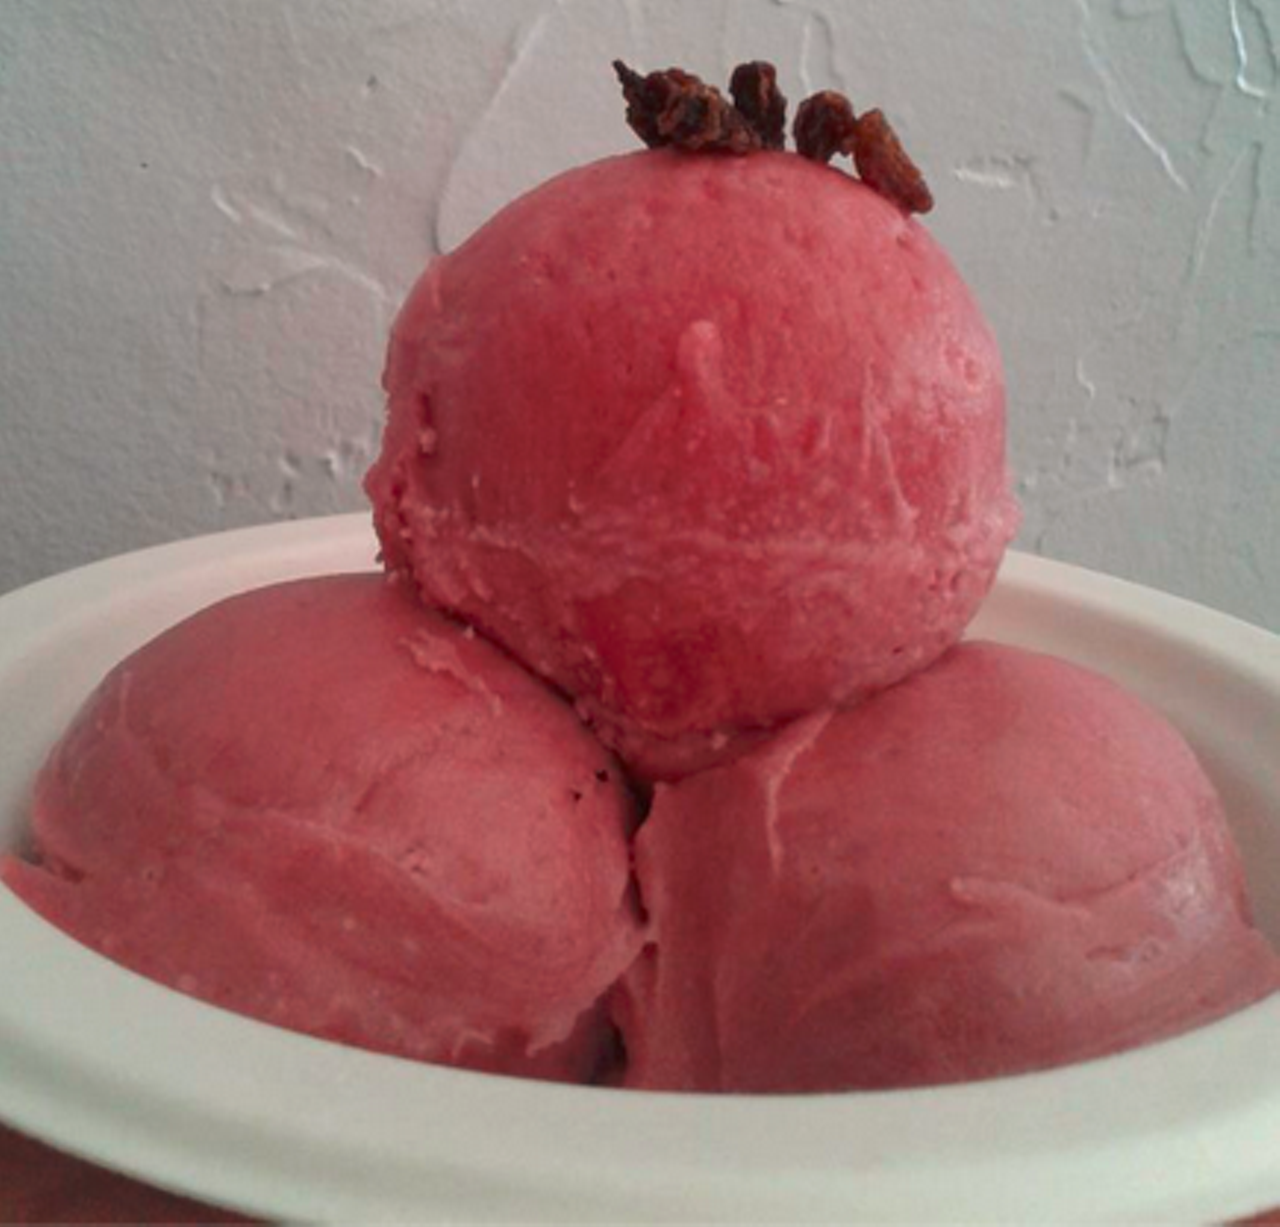 Churned is a vegan, dessert-lovers paradise. They always have a variety of soy free ice creams and sorbets on hand.